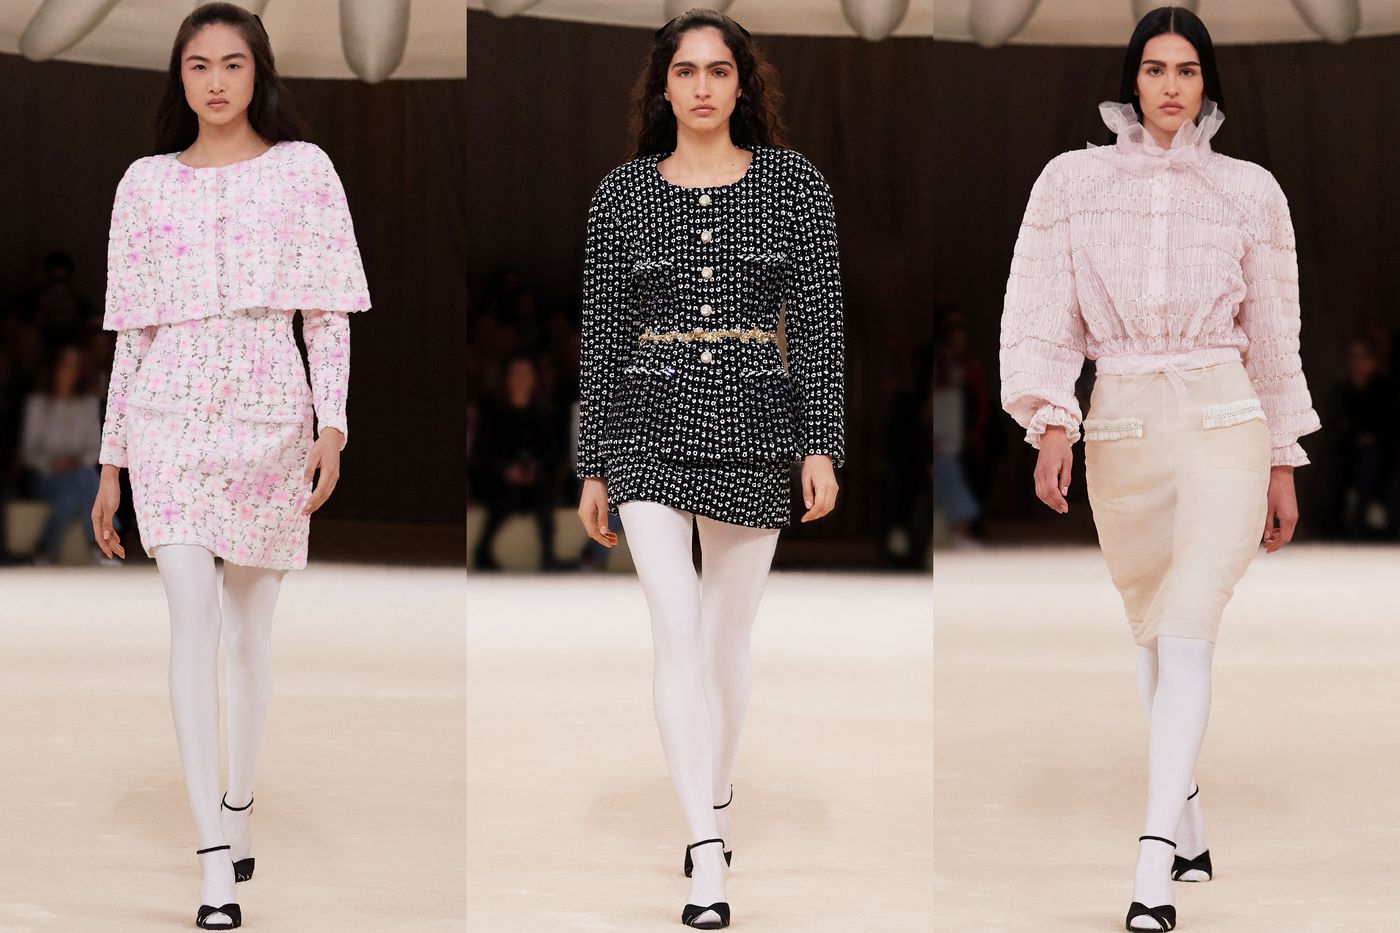 Chanel's spring couture show is a button-inspired ballet on the Paris runway